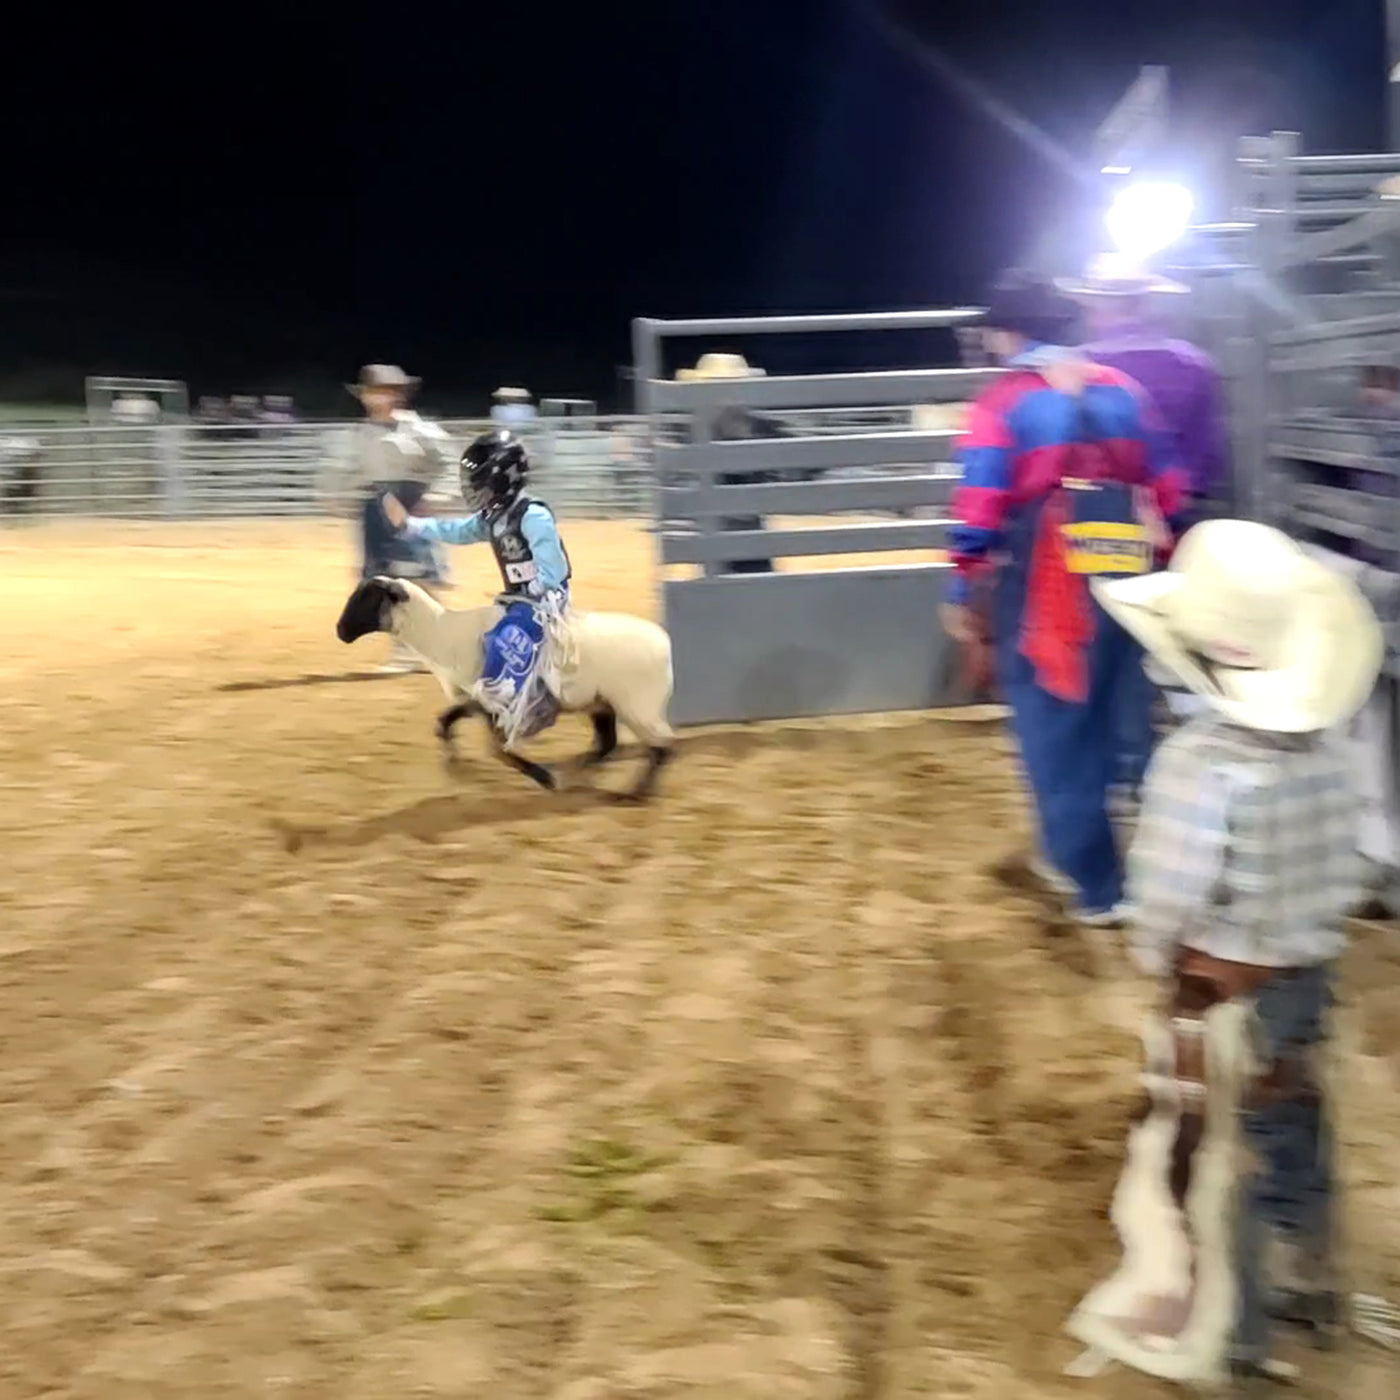 Camp Verde Rodeo Arena Upgrade + Sports LED Lighting Project